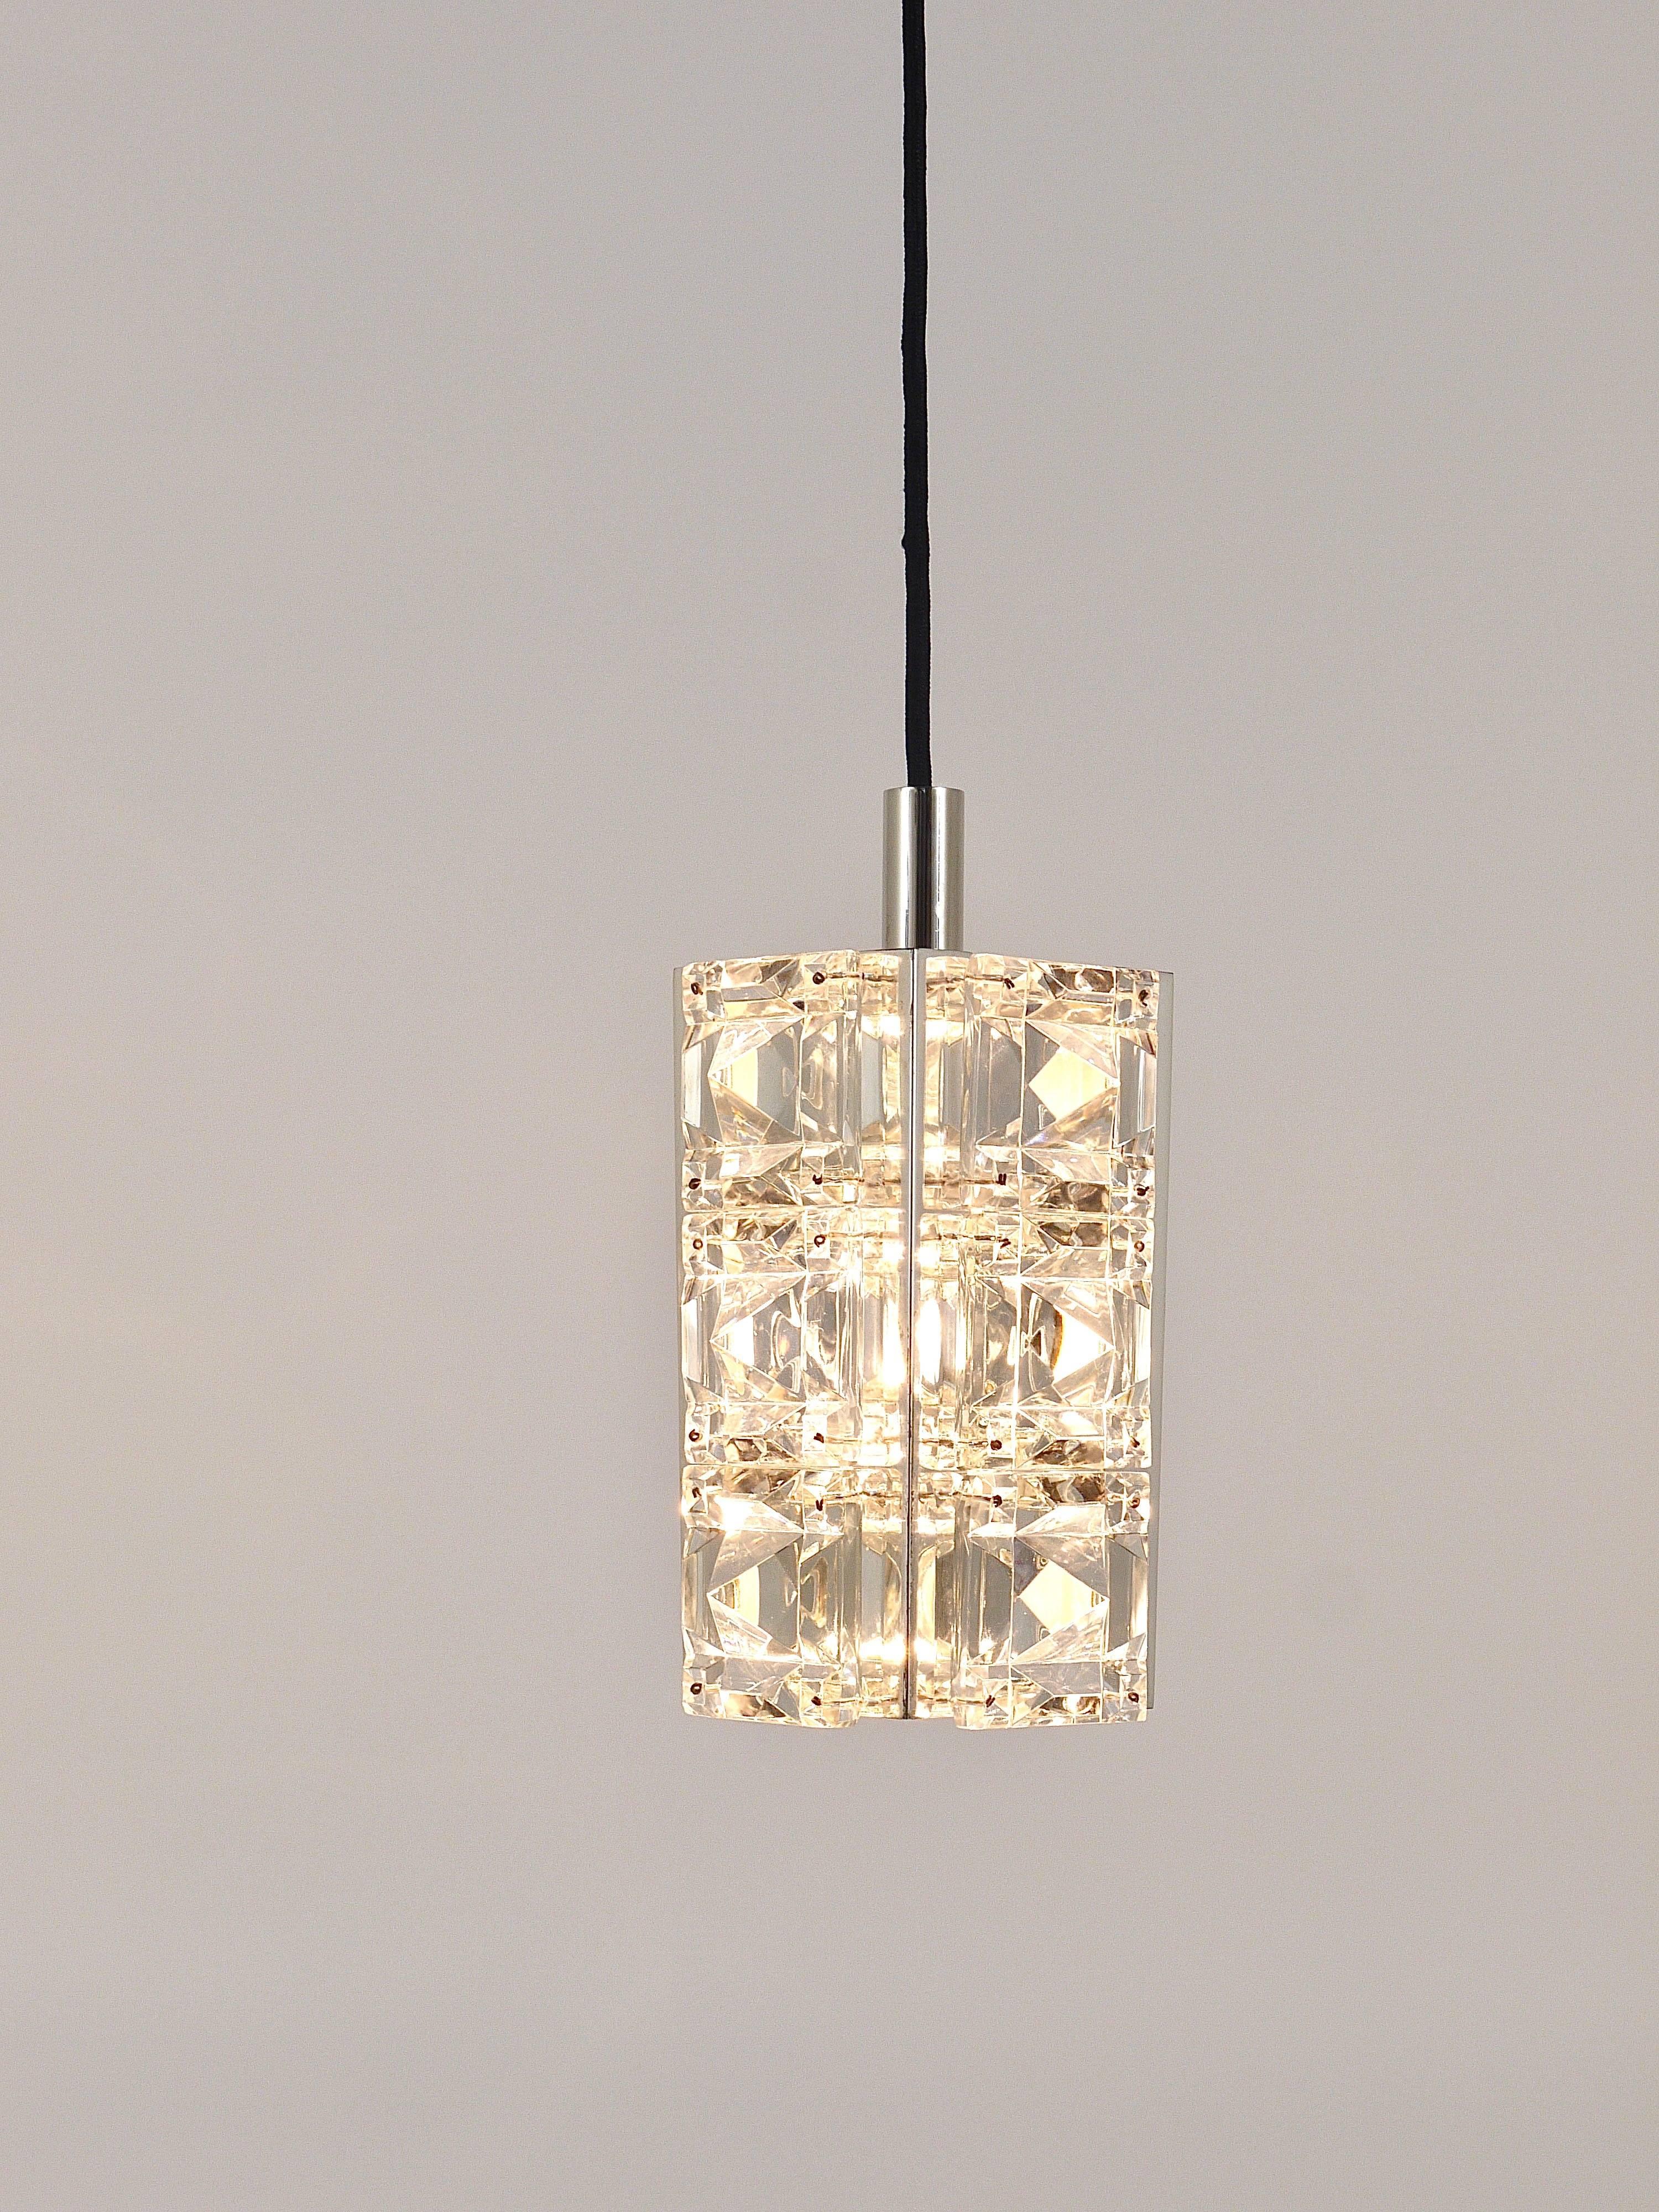 Up to Three Identical Bakalowits Faceted Crystal Pendant Lamps, Austria, 1960s For Sale 8